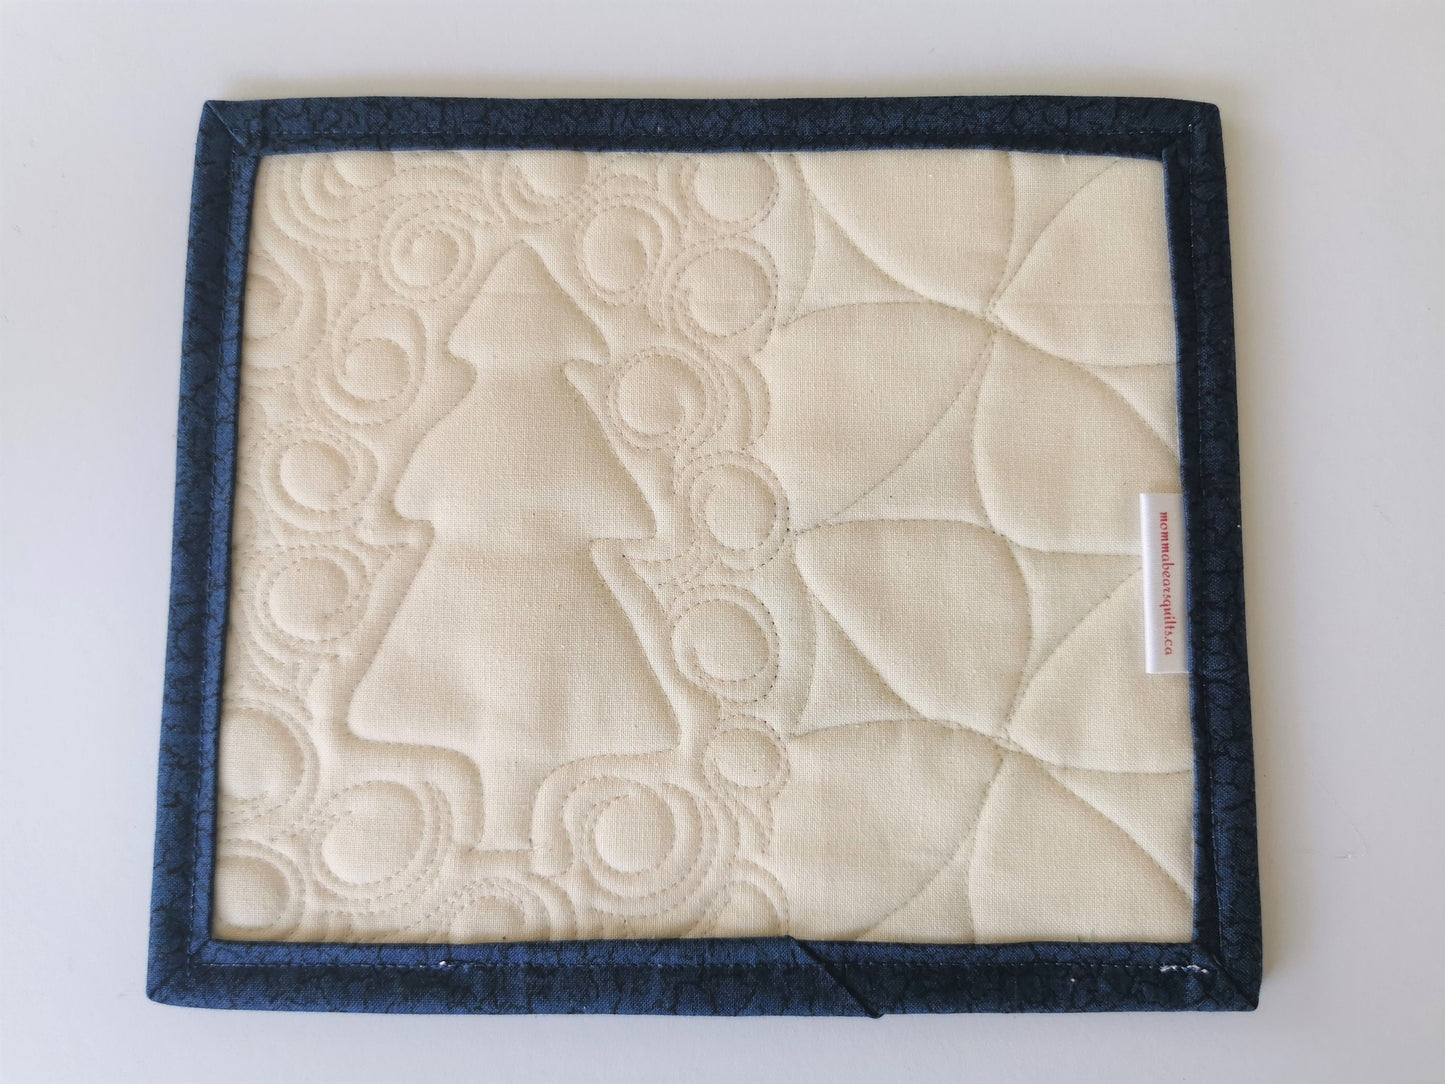 showing back of quilt